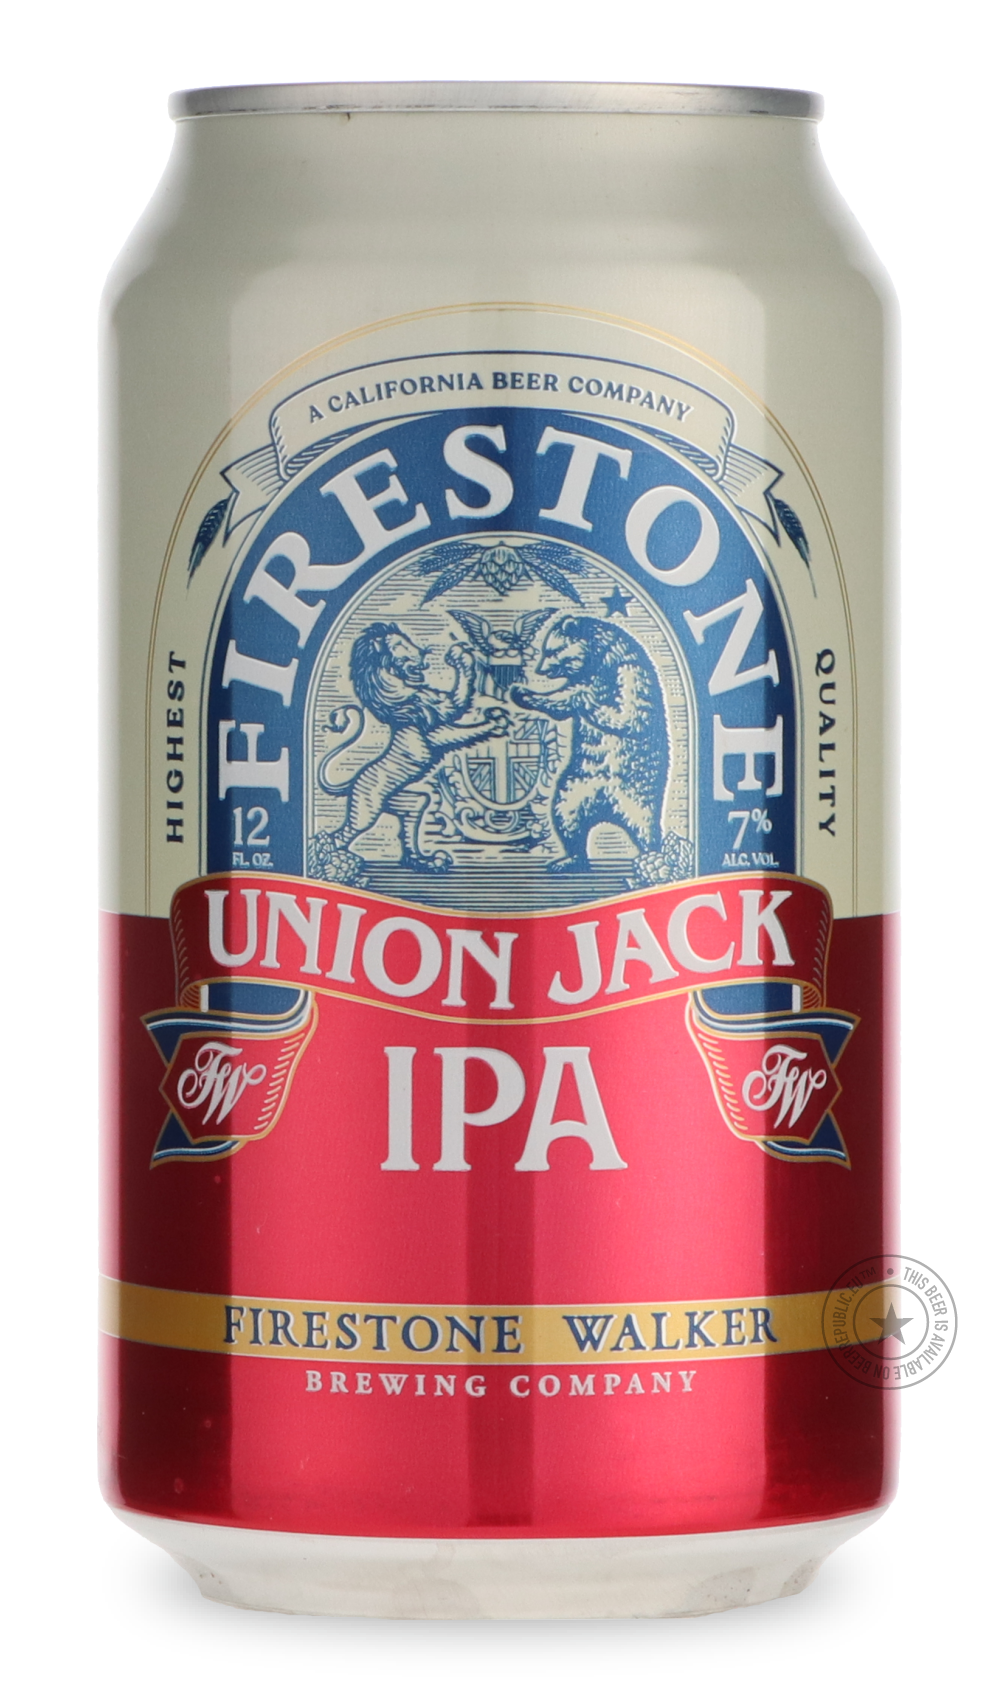 -Firestone Walker- Union Jack-IPA- Only @ Beer Republic - The best online beer store for American & Canadian craft beer - Buy beer online from the USA and Canada - Bier online kopen - Amerikaans bier kopen - Craft beer store - Craft beer kopen - Amerikanisch bier kaufen - Bier online kaufen - Acheter biere online - IPA - Stout - Porter - New England IPA - Hazy IPA - Imperial Stout - Barrel Aged - Barrel Aged Imperial Stout - Brown - Dark beer - Blond - Blonde - Pilsner - Lager - Wheat - Weizen - Amber - Bar